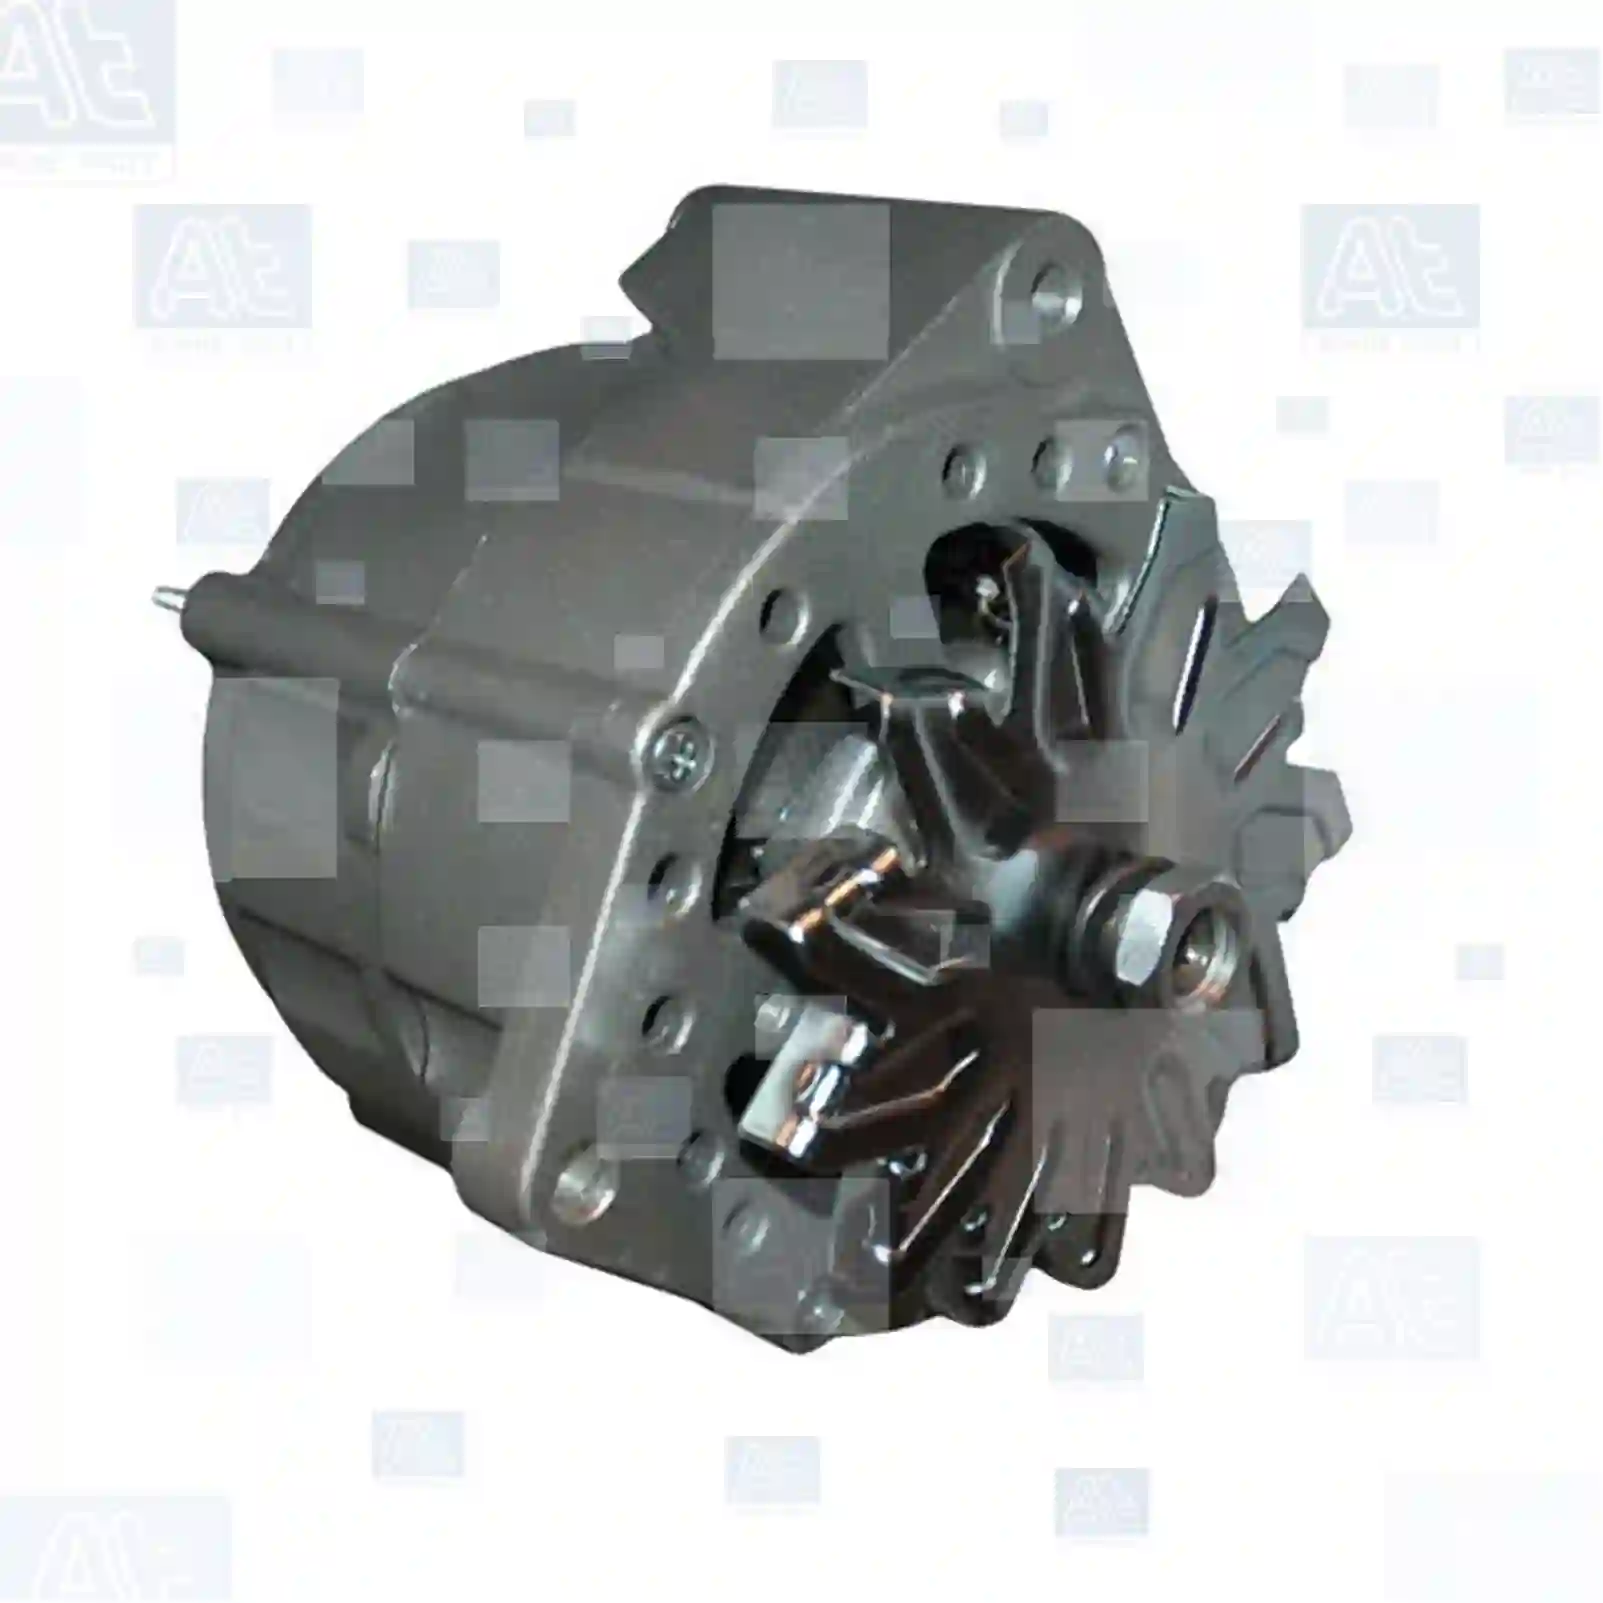 Alternator, without pulley, 77710000, 9019635901, 3255439, 0613097, 0854300, 0890775, 0894300, 1244492, 1244492A, 1244492R, 1274480, 1350515, 1350515A, 1350515R, 1357591, 1357591A, 1357591R, 1357592, 1516560, 1528595, 613097, 613097A, 613097R, 854300, 859232, 890775, 894300, AELD077, AMPC197, 01171461, 03040718, 1702103, 1702113, 9540702, 6002025, 6104058, 51261017119, 51261017123, 51261017144, 51261017184, 51261017185, 51261017201, 51261019123, 51261019144, 51261019185, 51261019201, 51262017185, 51262017201, 81261016018, 81261016027, 88261016001, 51261017201, 0051543402, 0061546802, 0071542702, 0091540702, 009154070280, 009154070287, 0101542002, 3661500750, 3661502050, 3761507050, 0101542002, 7421324000, 7421341000, 7421353000, 894300, ZG20247-0008 ||  77710000 At Spare Part | Engine, Accelerator Pedal, Camshaft, Connecting Rod, Crankcase, Crankshaft, Cylinder Head, Engine Suspension Mountings, Exhaust Manifold, Exhaust Gas Recirculation, Filter Kits, Flywheel Housing, General Overhaul Kits, Engine, Intake Manifold, Oil Cleaner, Oil Cooler, Oil Filter, Oil Pump, Oil Sump, Piston & Liner, Sensor & Switch, Timing Case, Turbocharger, Cooling System, Belt Tensioner, Coolant Filter, Coolant Pipe, Corrosion Prevention Agent, Drive, Expansion Tank, Fan, Intercooler, Monitors & Gauges, Radiator, Thermostat, V-Belt / Timing belt, Water Pump, Fuel System, Electronical Injector Unit, Feed Pump, Fuel Filter, cpl., Fuel Gauge Sender,  Fuel Line, Fuel Pump, Fuel Tank, Injection Line Kit, Injection Pump, Exhaust System, Clutch & Pedal, Gearbox, Propeller Shaft, Axles, Brake System, Hubs & Wheels, Suspension, Leaf Spring, Universal Parts / Accessories, Steering, Electrical System, Cabin Alternator, without pulley, 77710000, 9019635901, 3255439, 0613097, 0854300, 0890775, 0894300, 1244492, 1244492A, 1244492R, 1274480, 1350515, 1350515A, 1350515R, 1357591, 1357591A, 1357591R, 1357592, 1516560, 1528595, 613097, 613097A, 613097R, 854300, 859232, 890775, 894300, AELD077, AMPC197, 01171461, 03040718, 1702103, 1702113, 9540702, 6002025, 6104058, 51261017119, 51261017123, 51261017144, 51261017184, 51261017185, 51261017201, 51261019123, 51261019144, 51261019185, 51261019201, 51262017185, 51262017201, 81261016018, 81261016027, 88261016001, 51261017201, 0051543402, 0061546802, 0071542702, 0091540702, 009154070280, 009154070287, 0101542002, 3661500750, 3661502050, 3761507050, 0101542002, 7421324000, 7421341000, 7421353000, 894300, ZG20247-0008 ||  77710000 At Spare Part | Engine, Accelerator Pedal, Camshaft, Connecting Rod, Crankcase, Crankshaft, Cylinder Head, Engine Suspension Mountings, Exhaust Manifold, Exhaust Gas Recirculation, Filter Kits, Flywheel Housing, General Overhaul Kits, Engine, Intake Manifold, Oil Cleaner, Oil Cooler, Oil Filter, Oil Pump, Oil Sump, Piston & Liner, Sensor & Switch, Timing Case, Turbocharger, Cooling System, Belt Tensioner, Coolant Filter, Coolant Pipe, Corrosion Prevention Agent, Drive, Expansion Tank, Fan, Intercooler, Monitors & Gauges, Radiator, Thermostat, V-Belt / Timing belt, Water Pump, Fuel System, Electronical Injector Unit, Feed Pump, Fuel Filter, cpl., Fuel Gauge Sender,  Fuel Line, Fuel Pump, Fuel Tank, Injection Line Kit, Injection Pump, Exhaust System, Clutch & Pedal, Gearbox, Propeller Shaft, Axles, Brake System, Hubs & Wheels, Suspension, Leaf Spring, Universal Parts / Accessories, Steering, Electrical System, Cabin